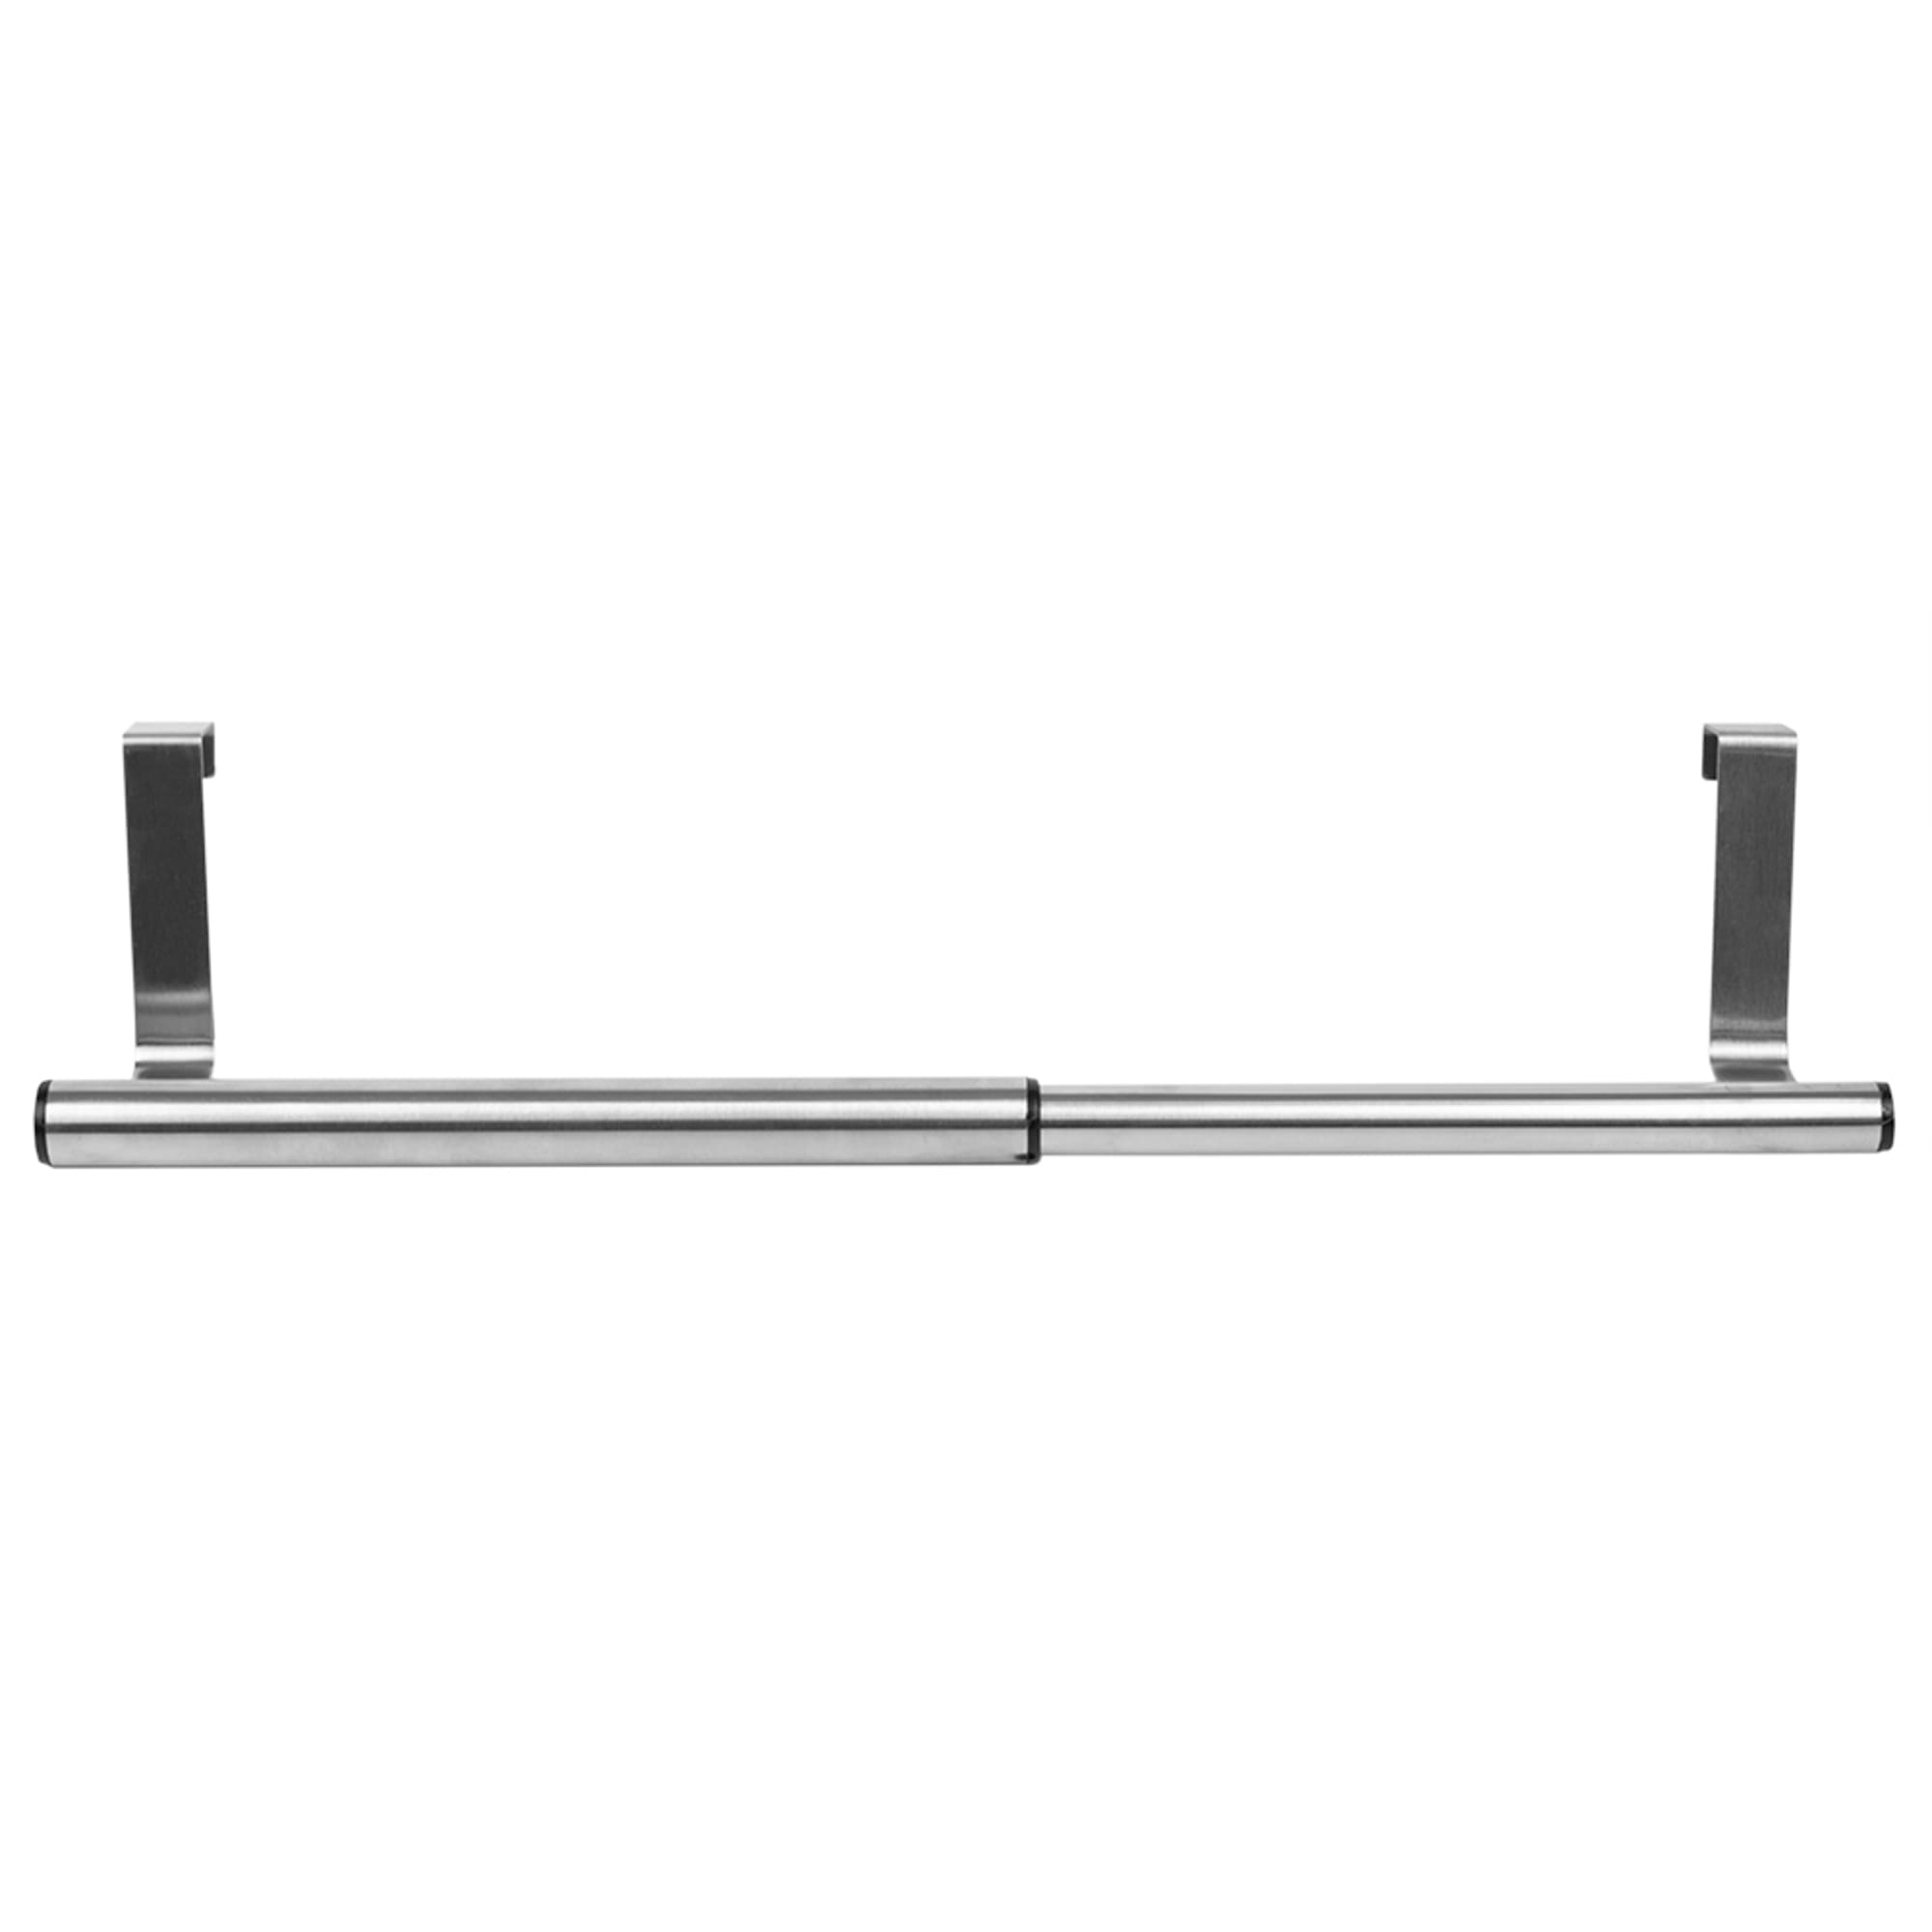 Home Basics Over the Cabinet Door Quick Install Hanging Modern Expandable Steel Towel Storage Rack, Chrome $3.00 EACH, CASE PACK OF 12